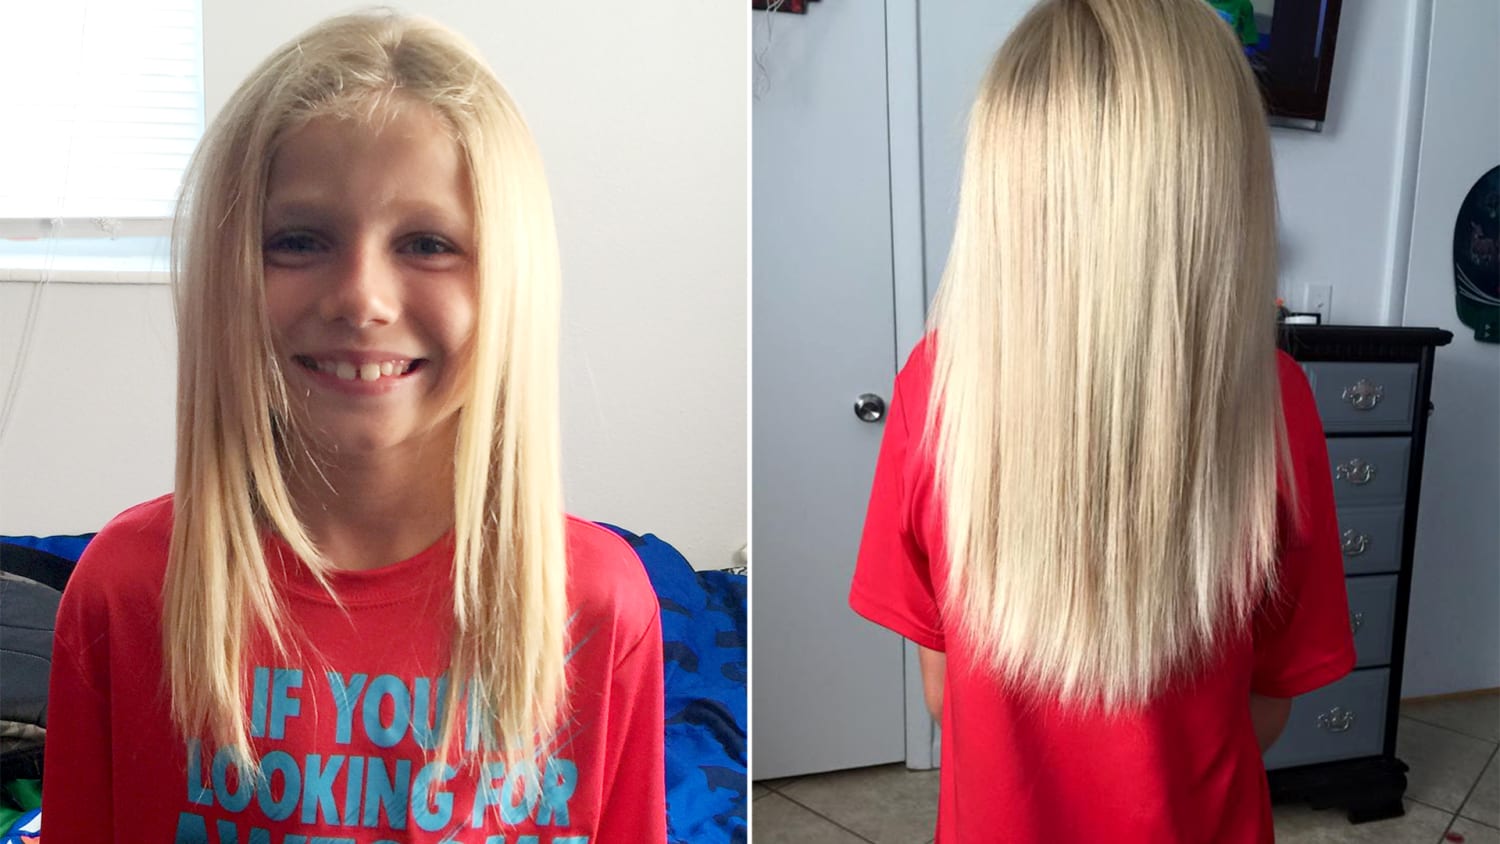 Florida boy grows out hair to donate to child in need